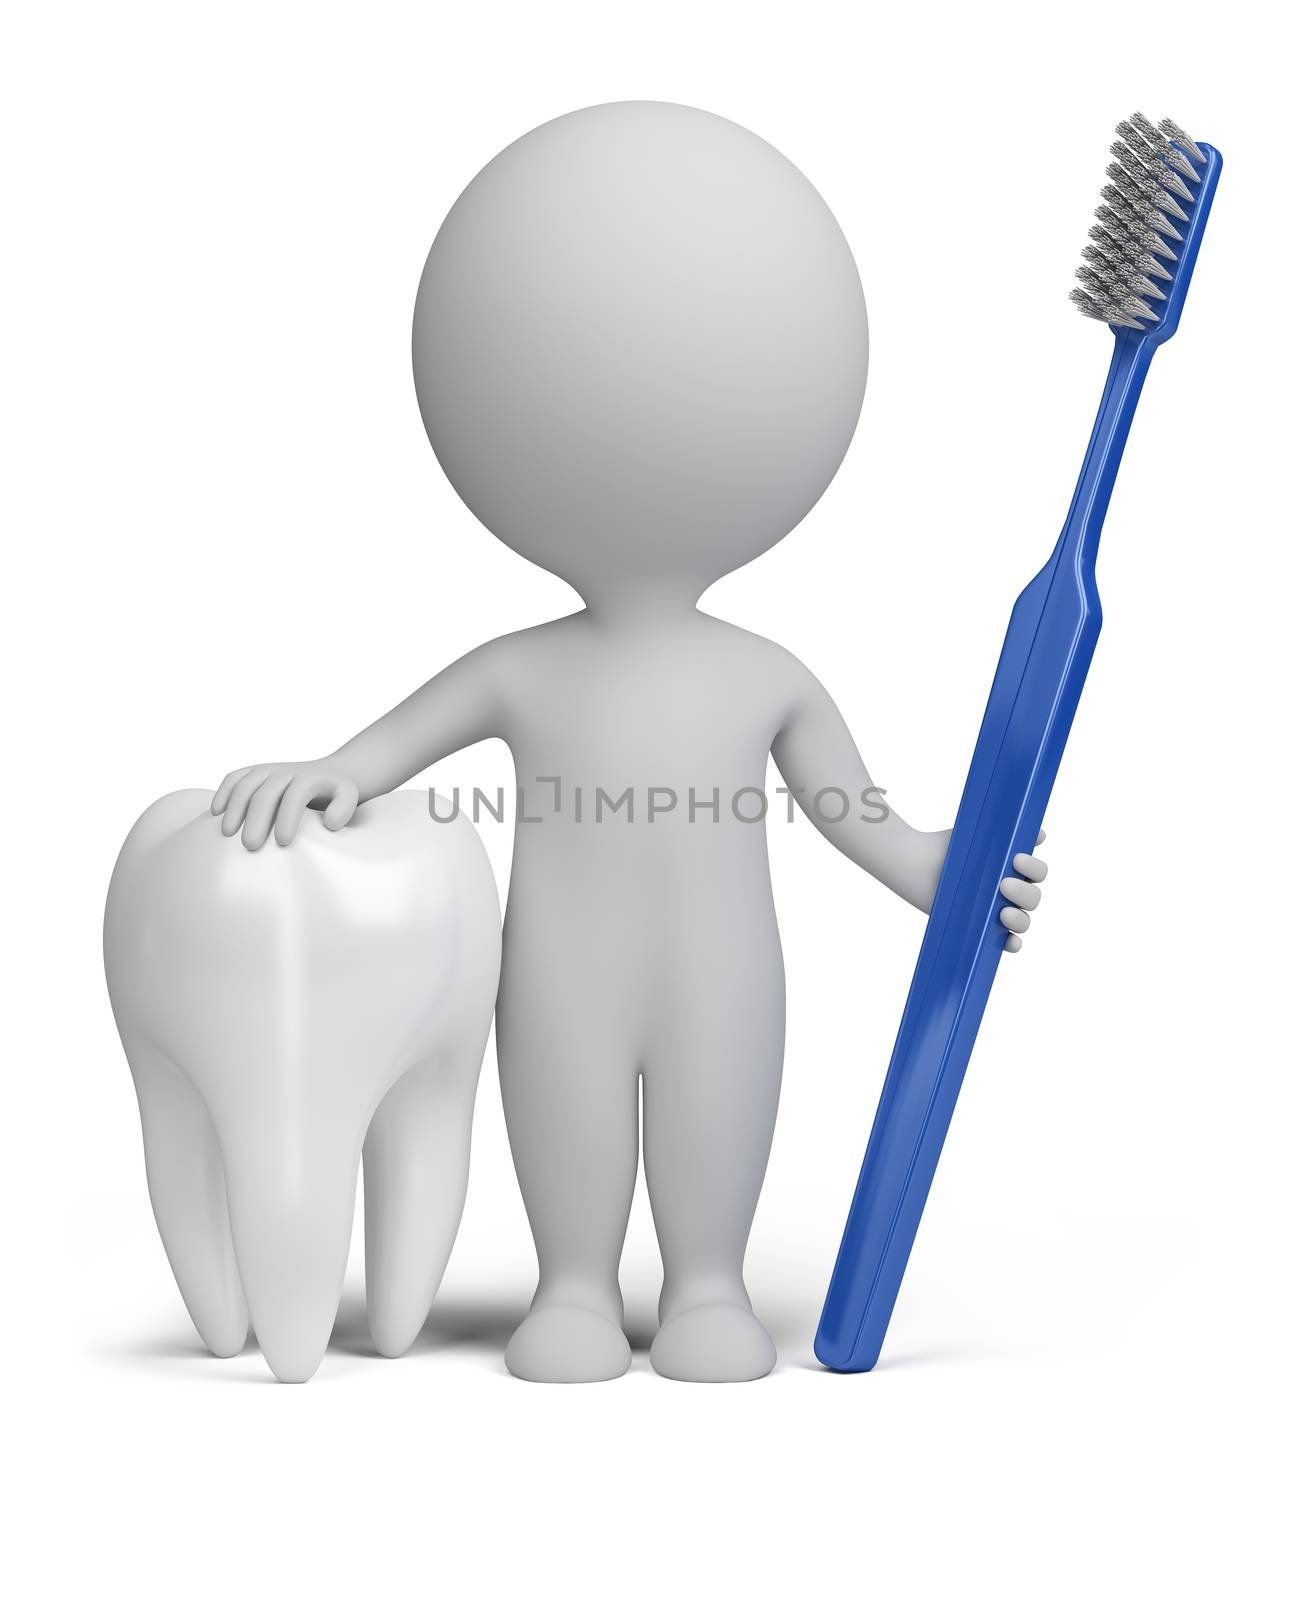 3d small person with a tooth and toothbrush. 3d image. Isolated white background.